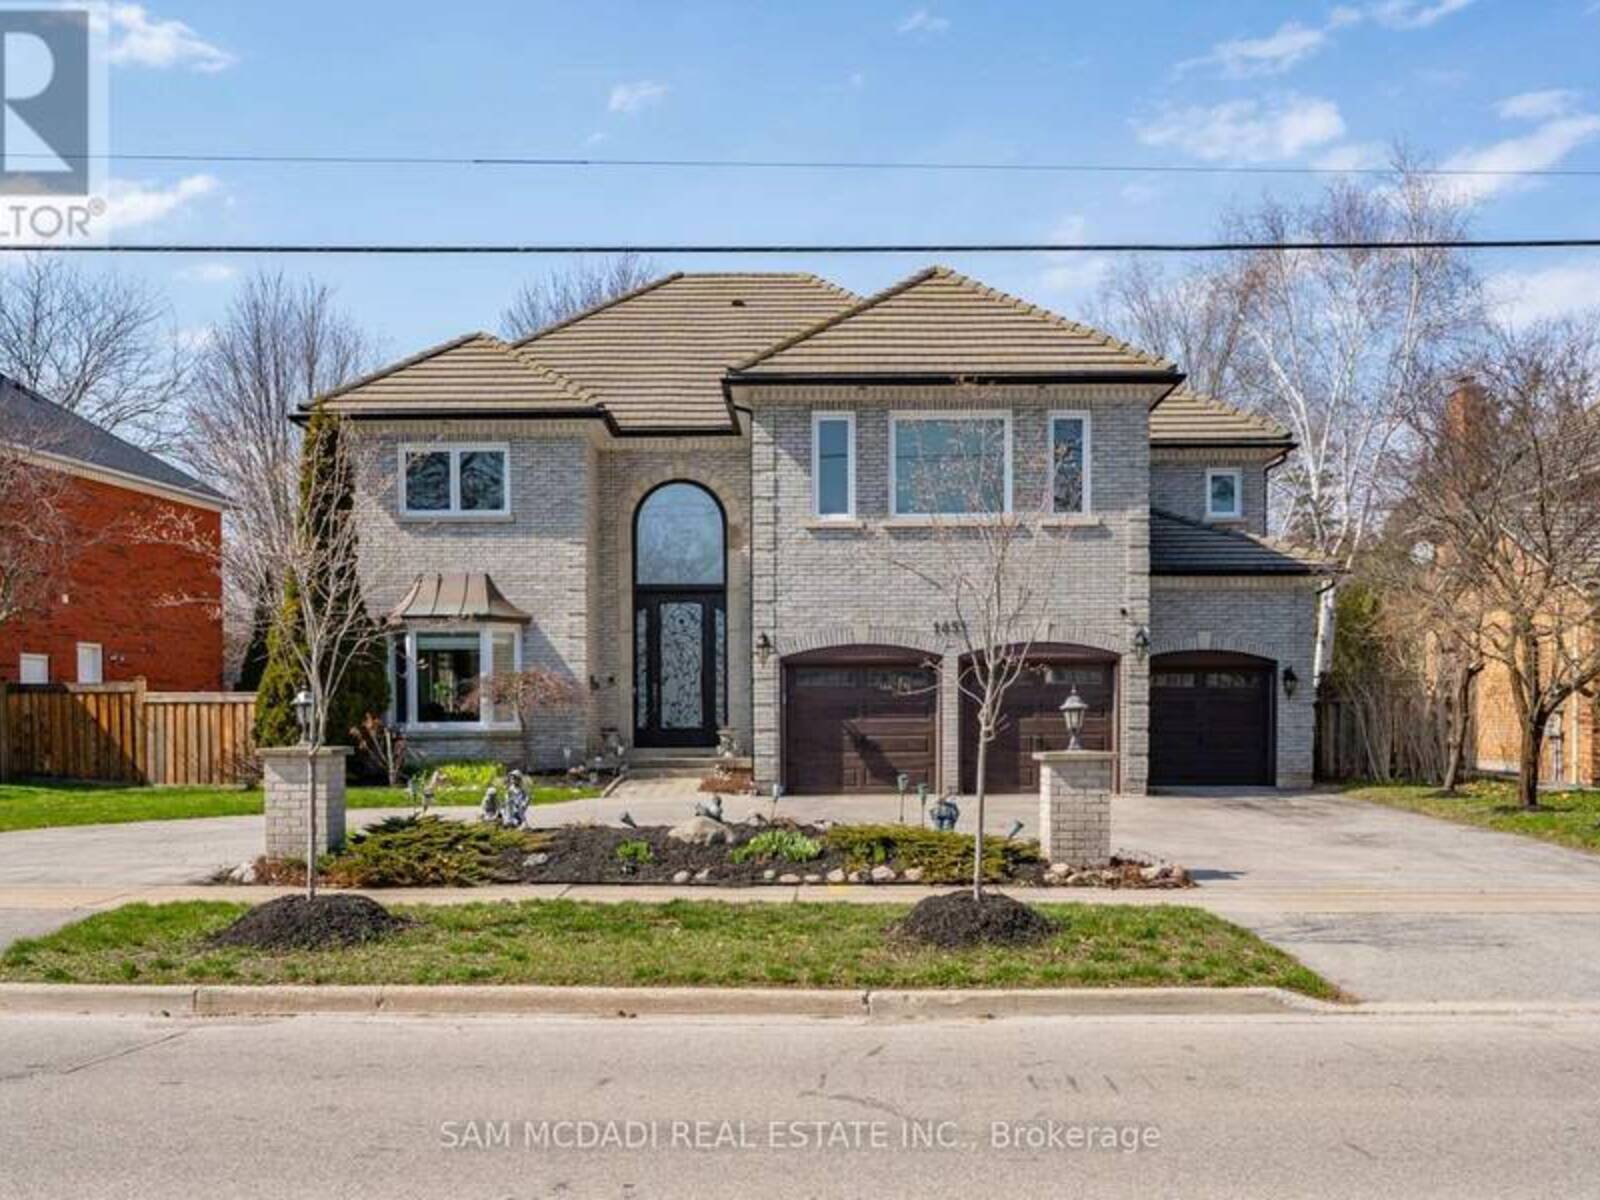 1451 INDIAN ROAD, Mississauga, Ontario L5H 1S5